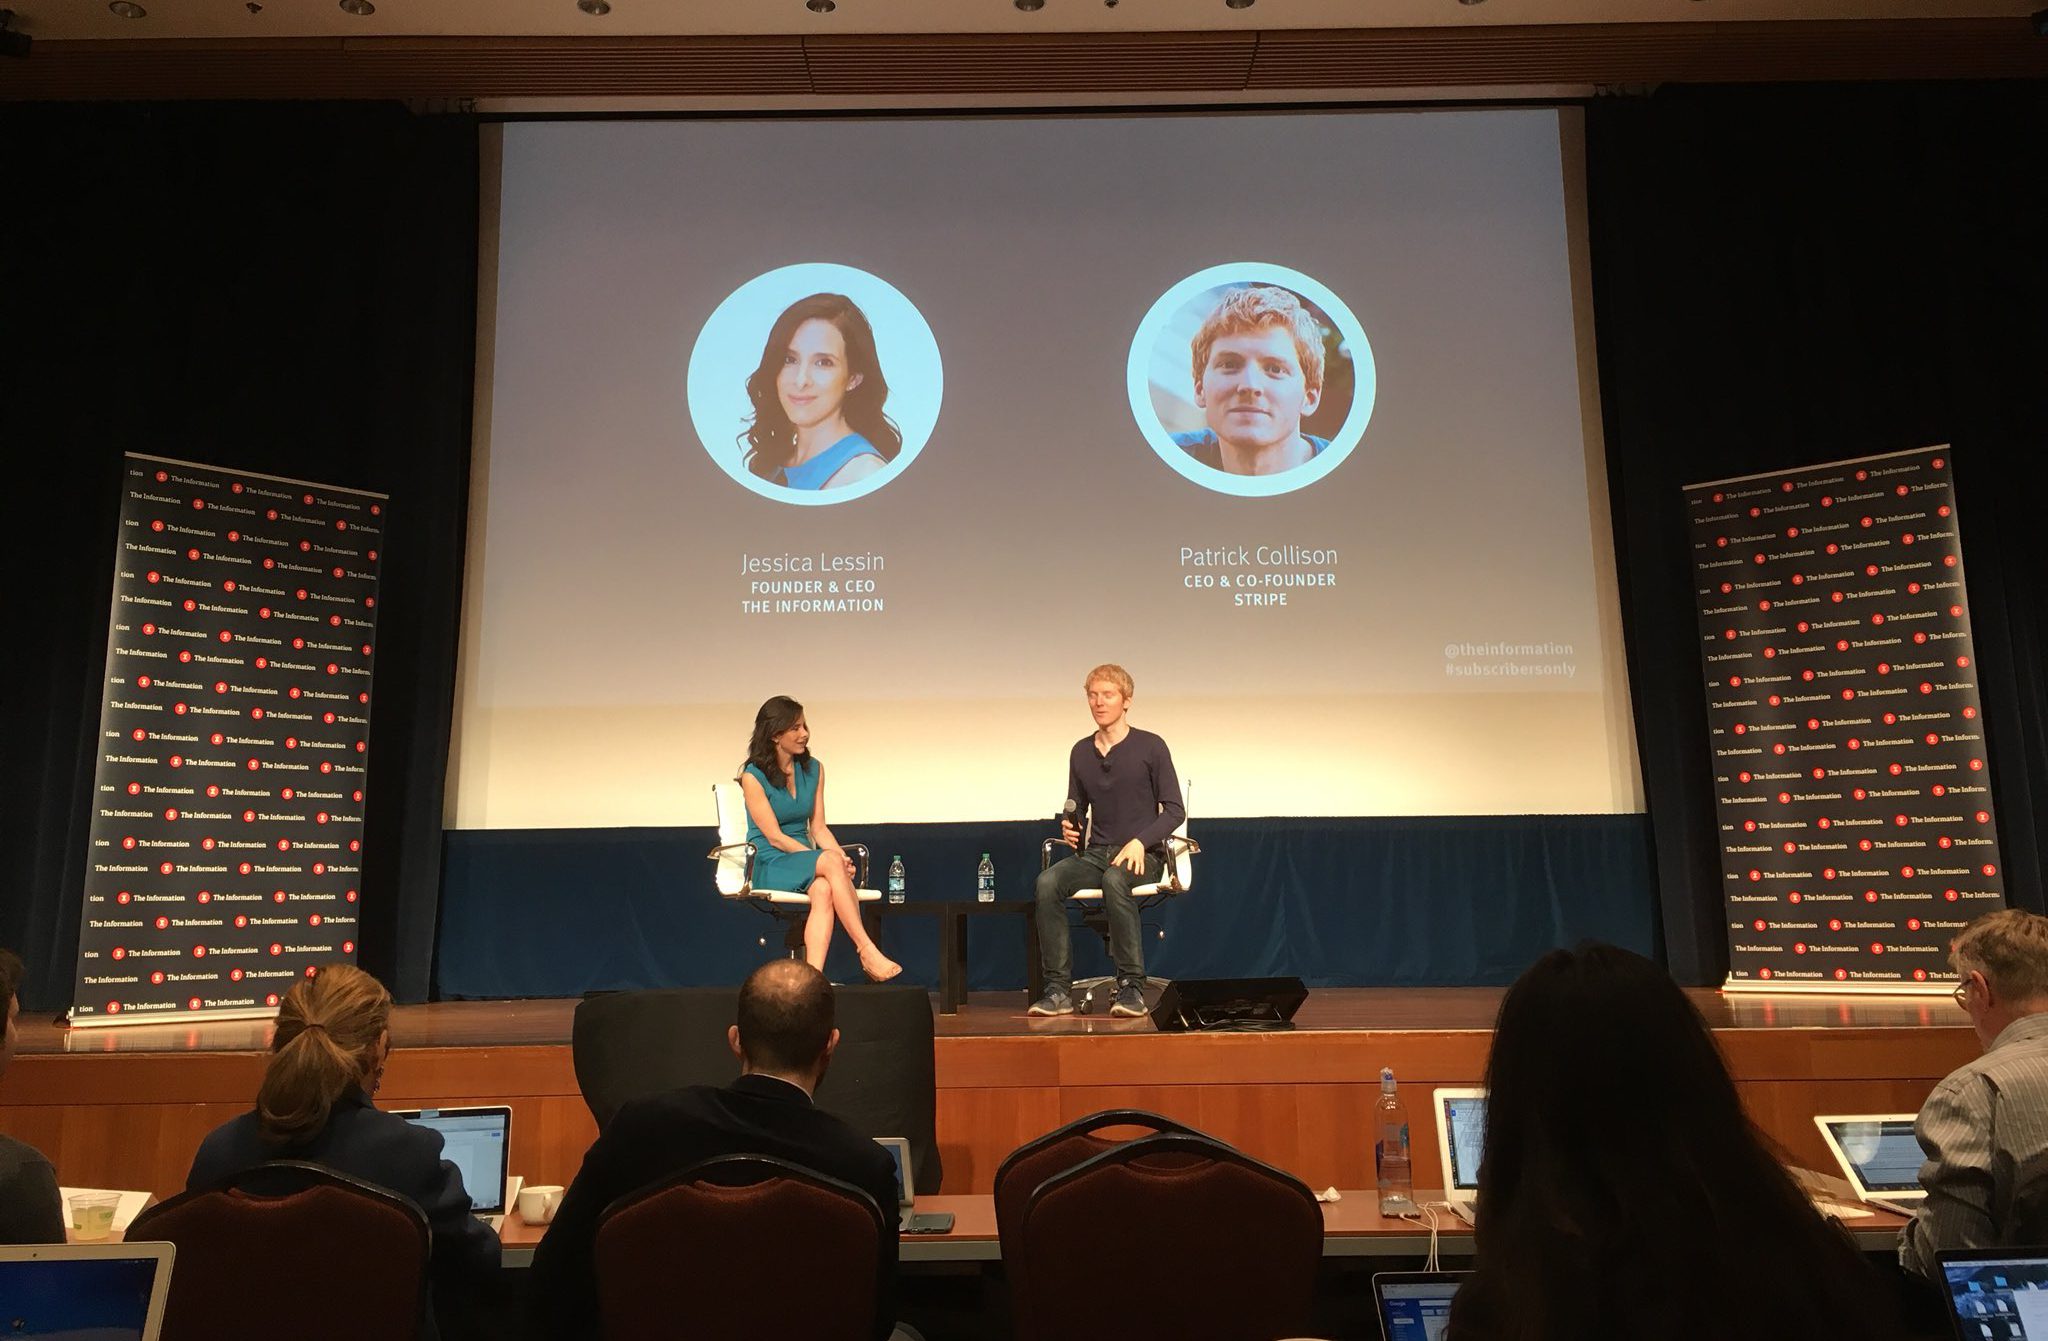 Stripe CEO shares his story at an entrepreneur program